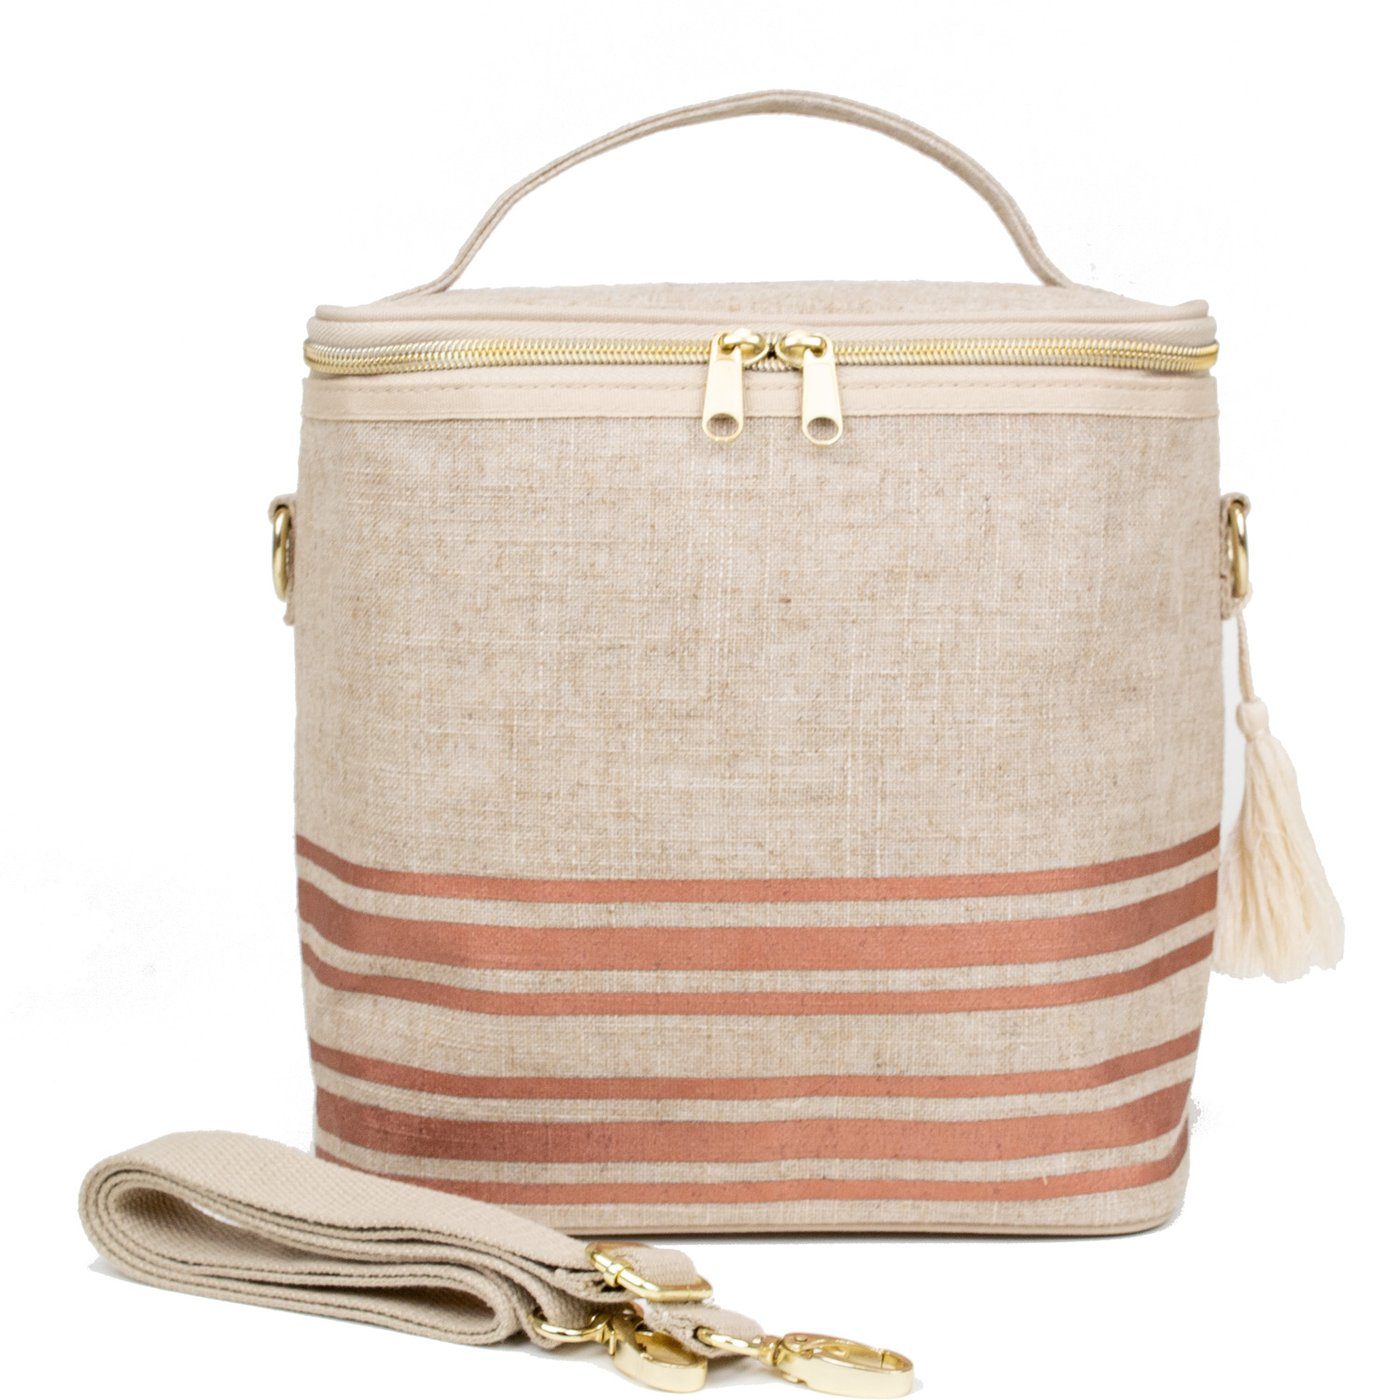 Linen Lunch Poche Bag - Rose Gold Stripe on the go SoYoung Prettycleanshop